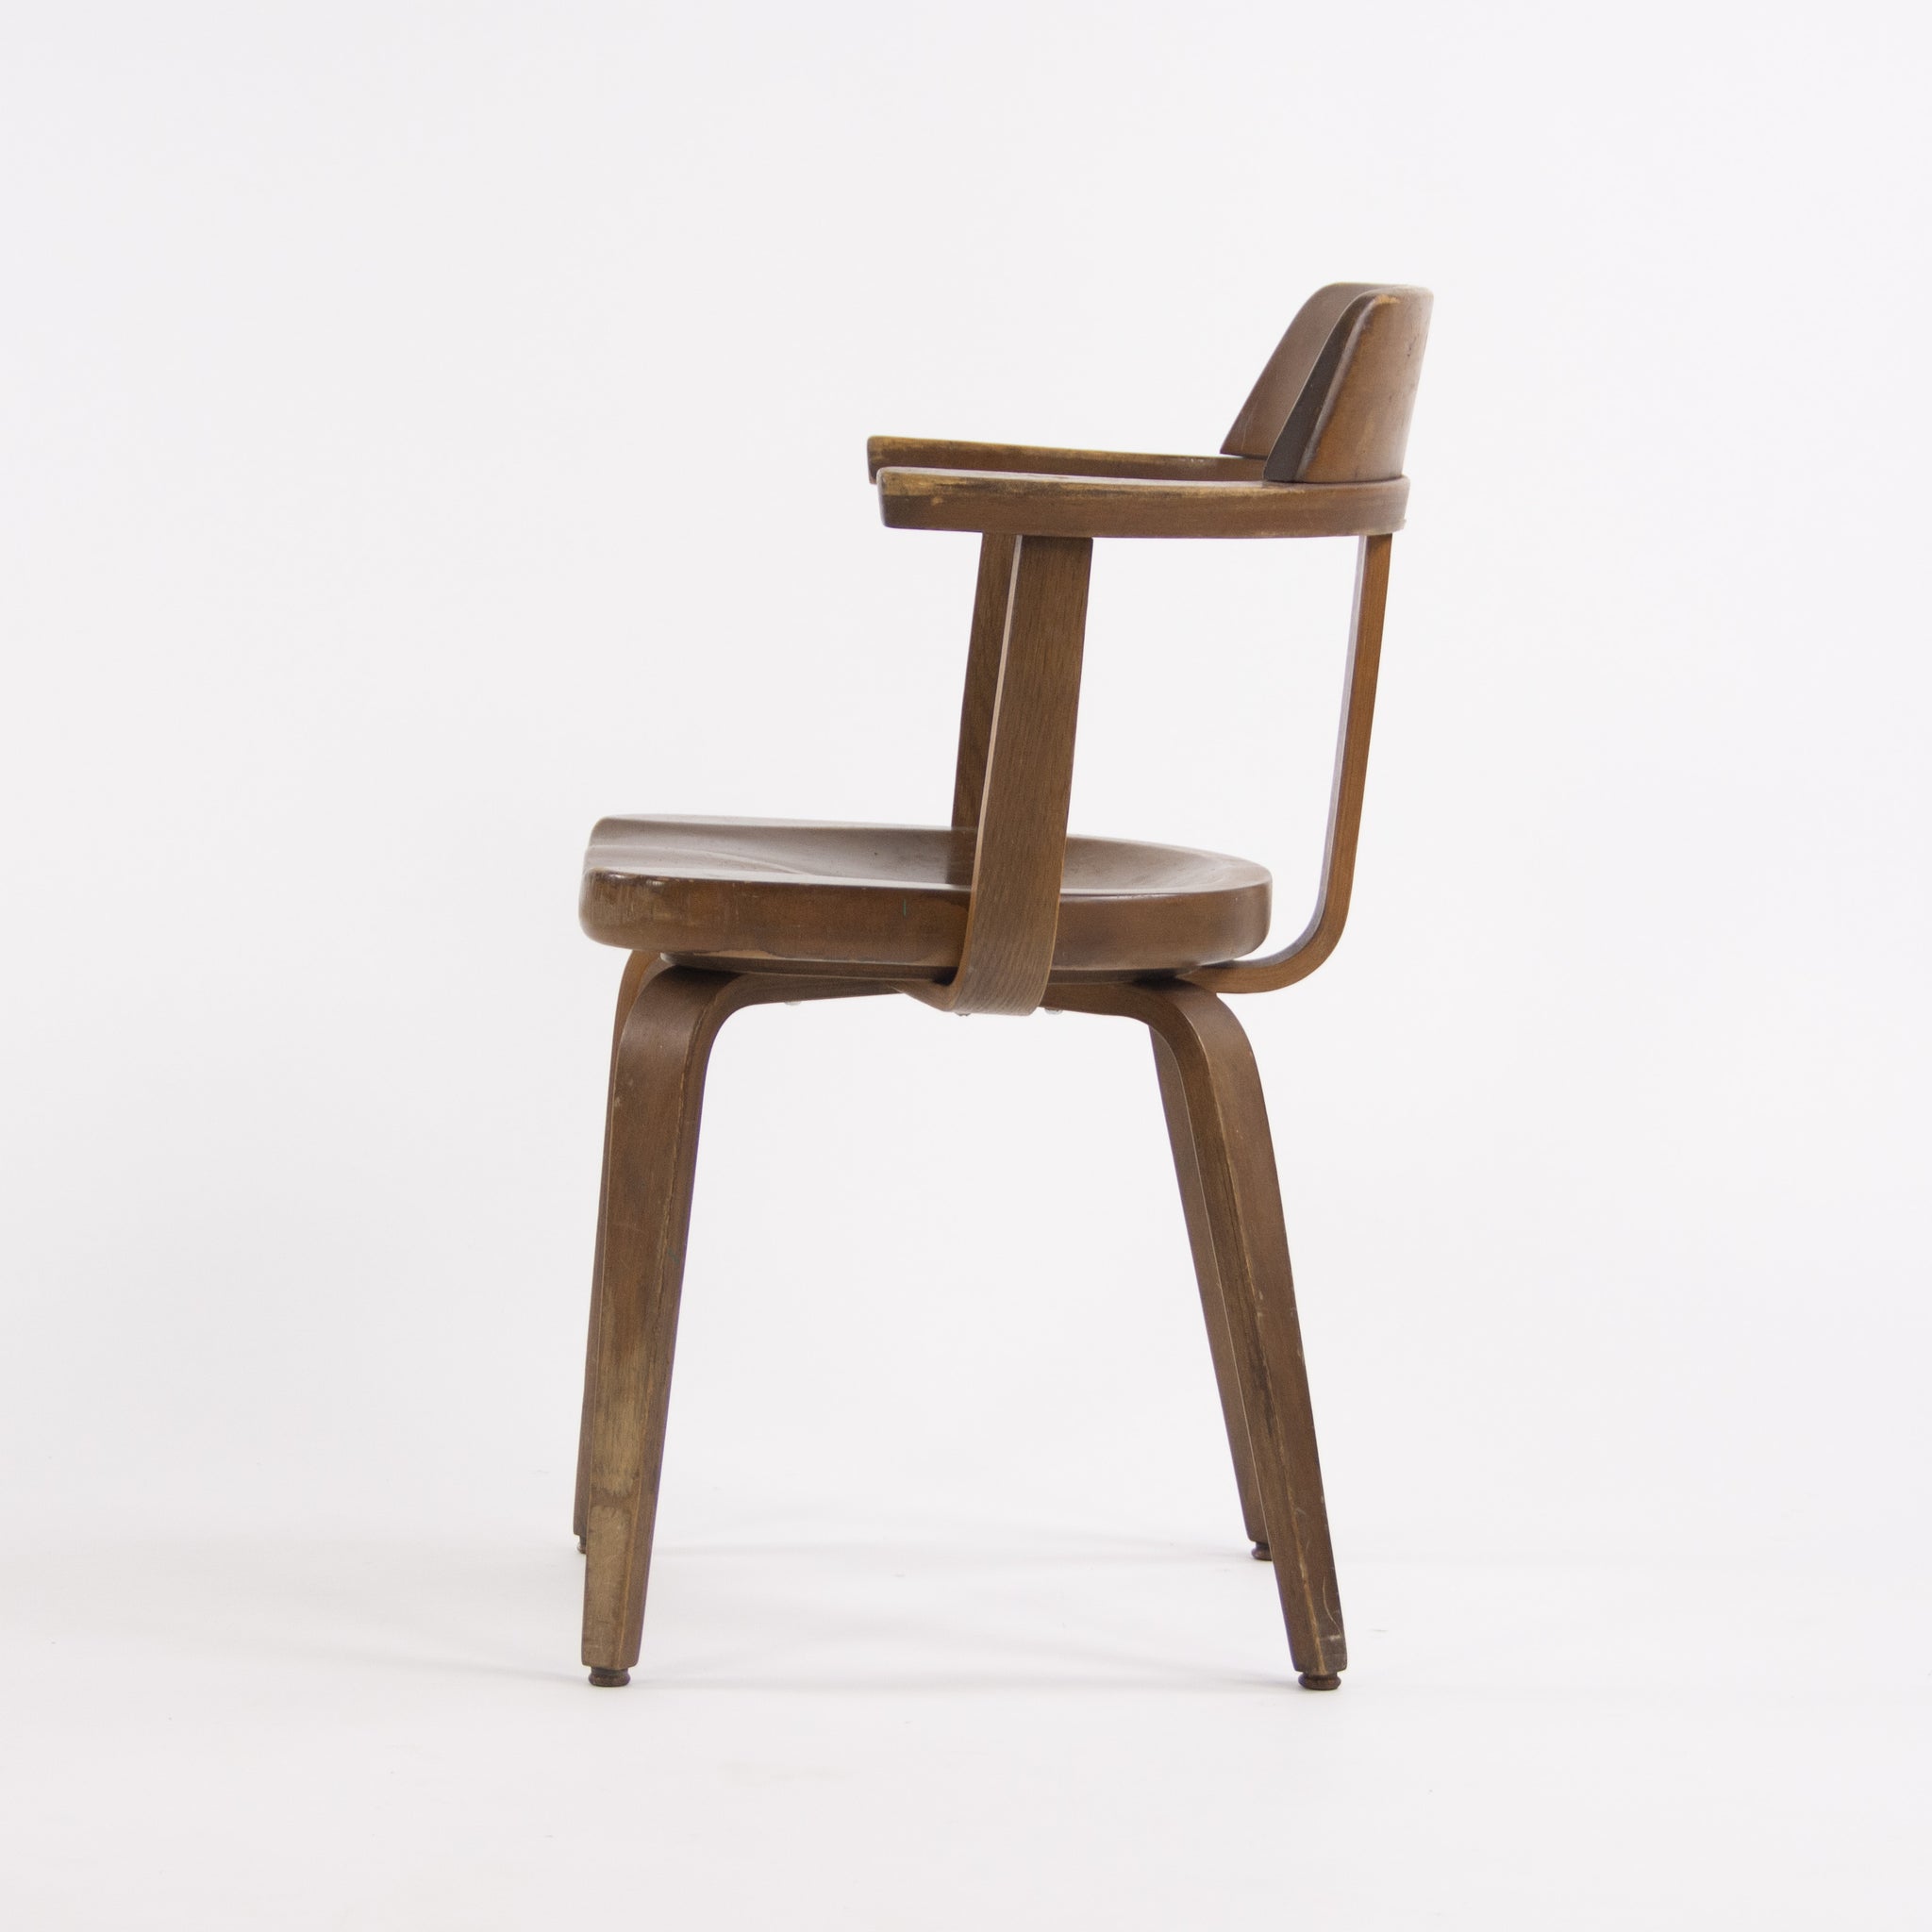 SOLD 1951 Walter Gropius for Thonet W199 Dining Armchair Bauhaus from Chicago